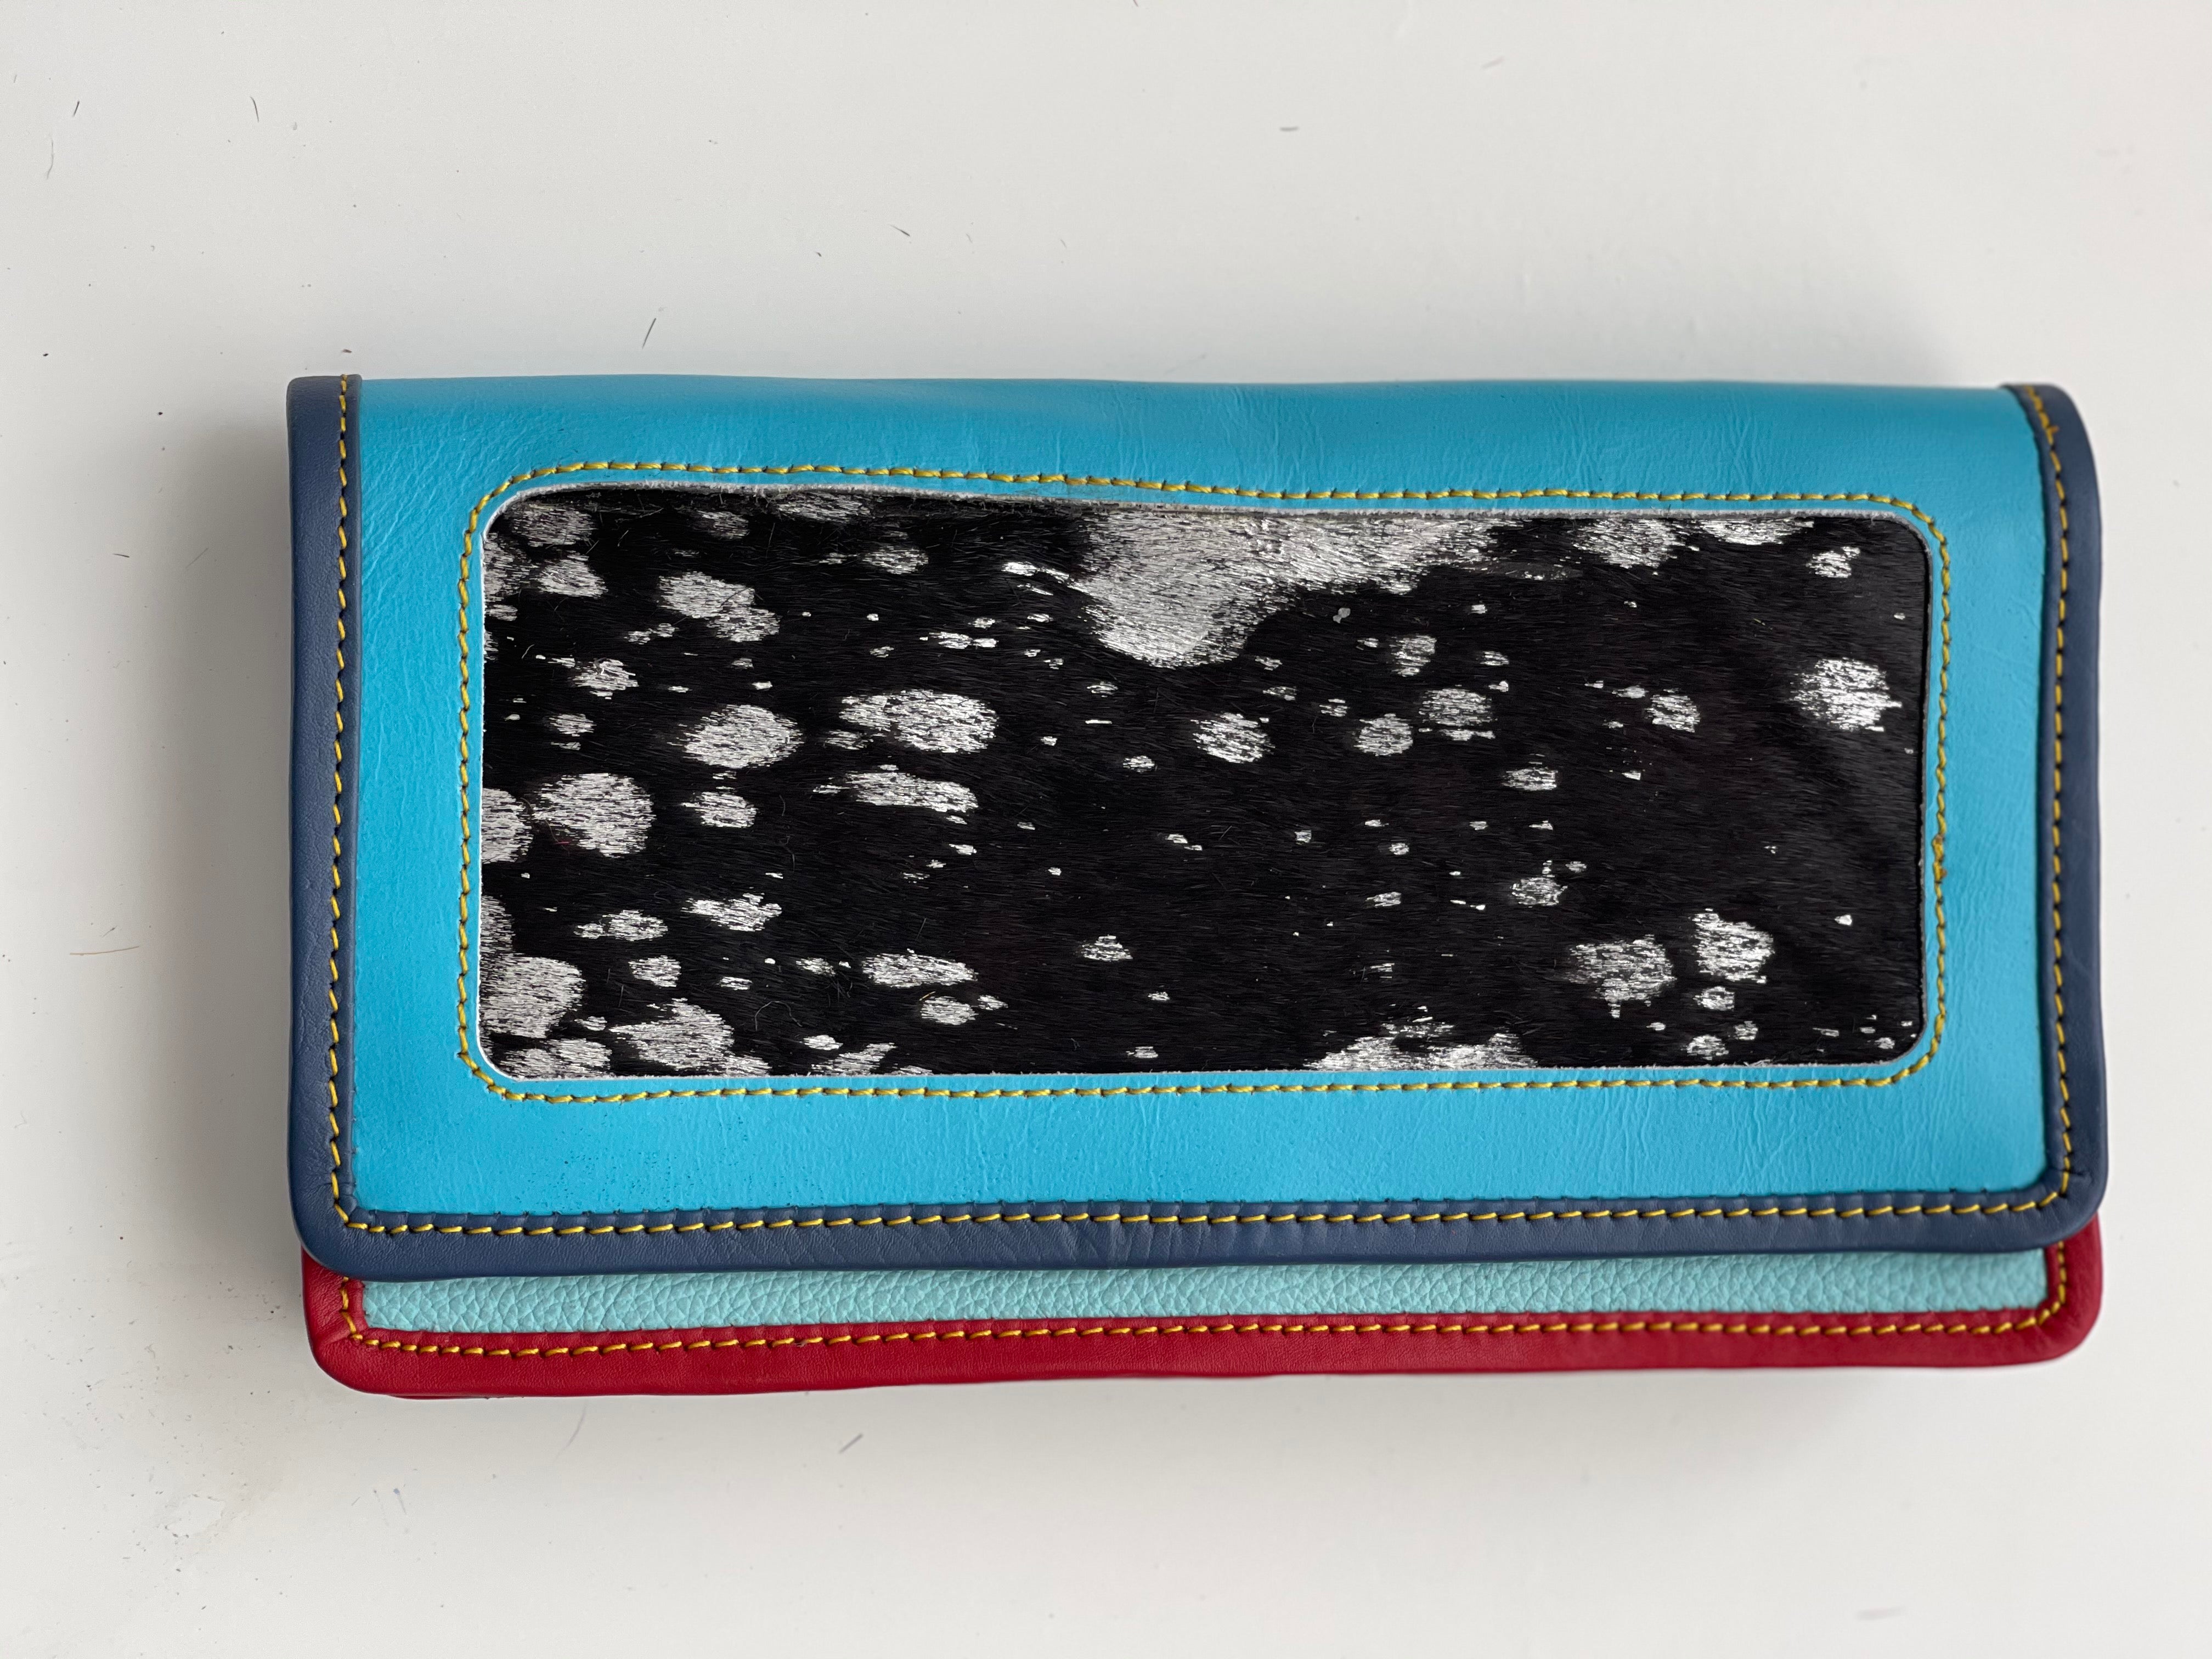 Genuine Leather Folklore Wallets